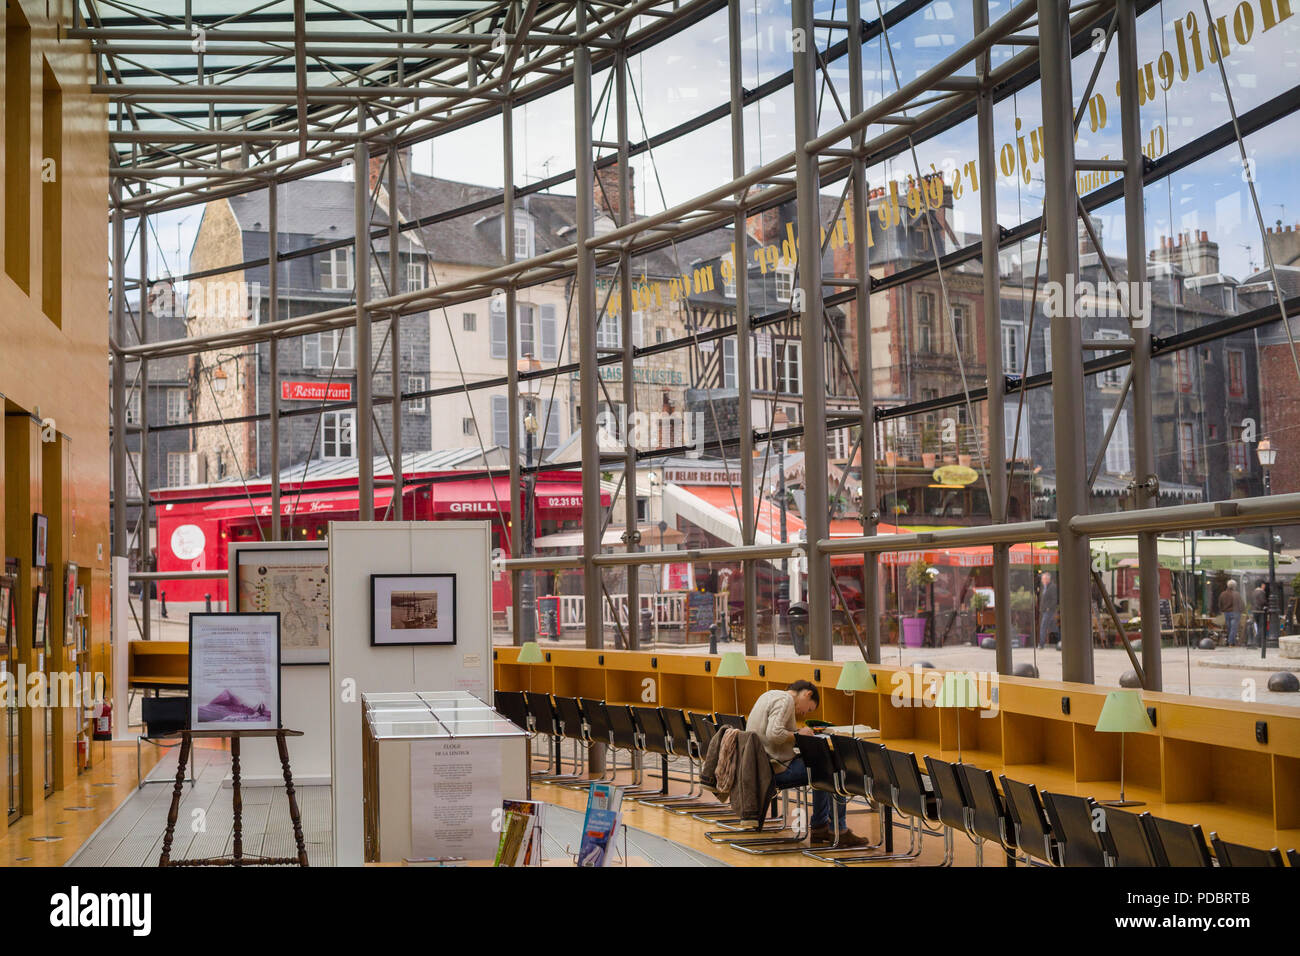 A view from the interior of the modern glass fronted public library in Honfleur, Normandy, France with the ancient buildings in the street outside Stock Photo